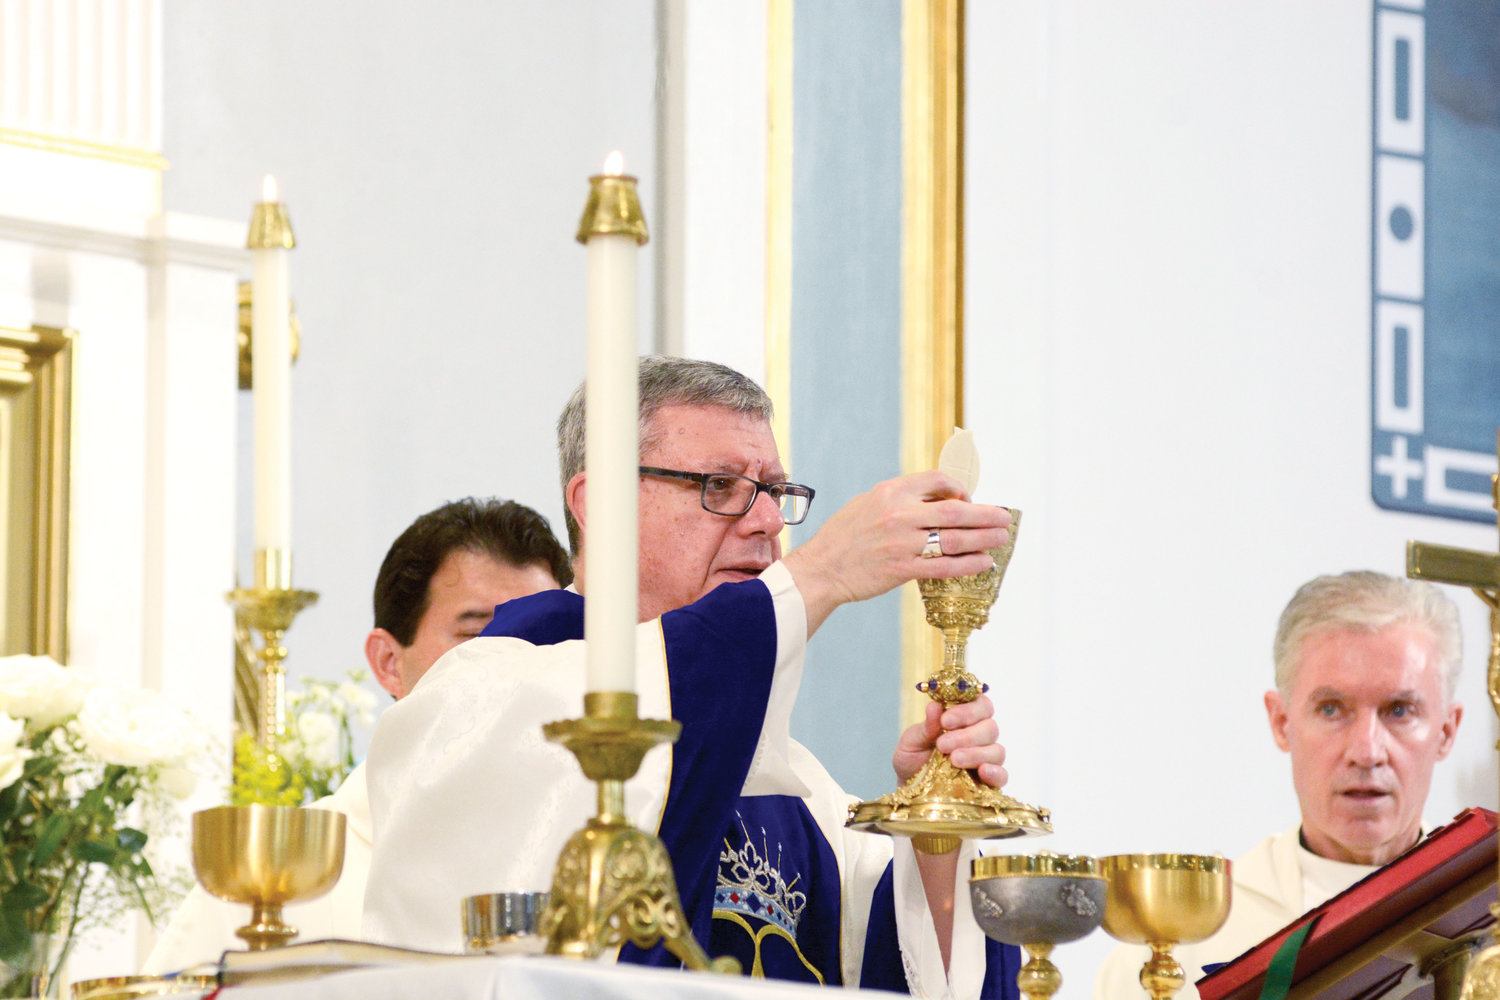 TABLE OF THE LORD—Auxiliary Bishop Gerardo J. Colacicco prays during the consecration of the Eucharist at the Vigil Mass for the Feast of the Assumption of the Blessed Virgin Mary Aug.14 at Assumption Church in Peekskill.